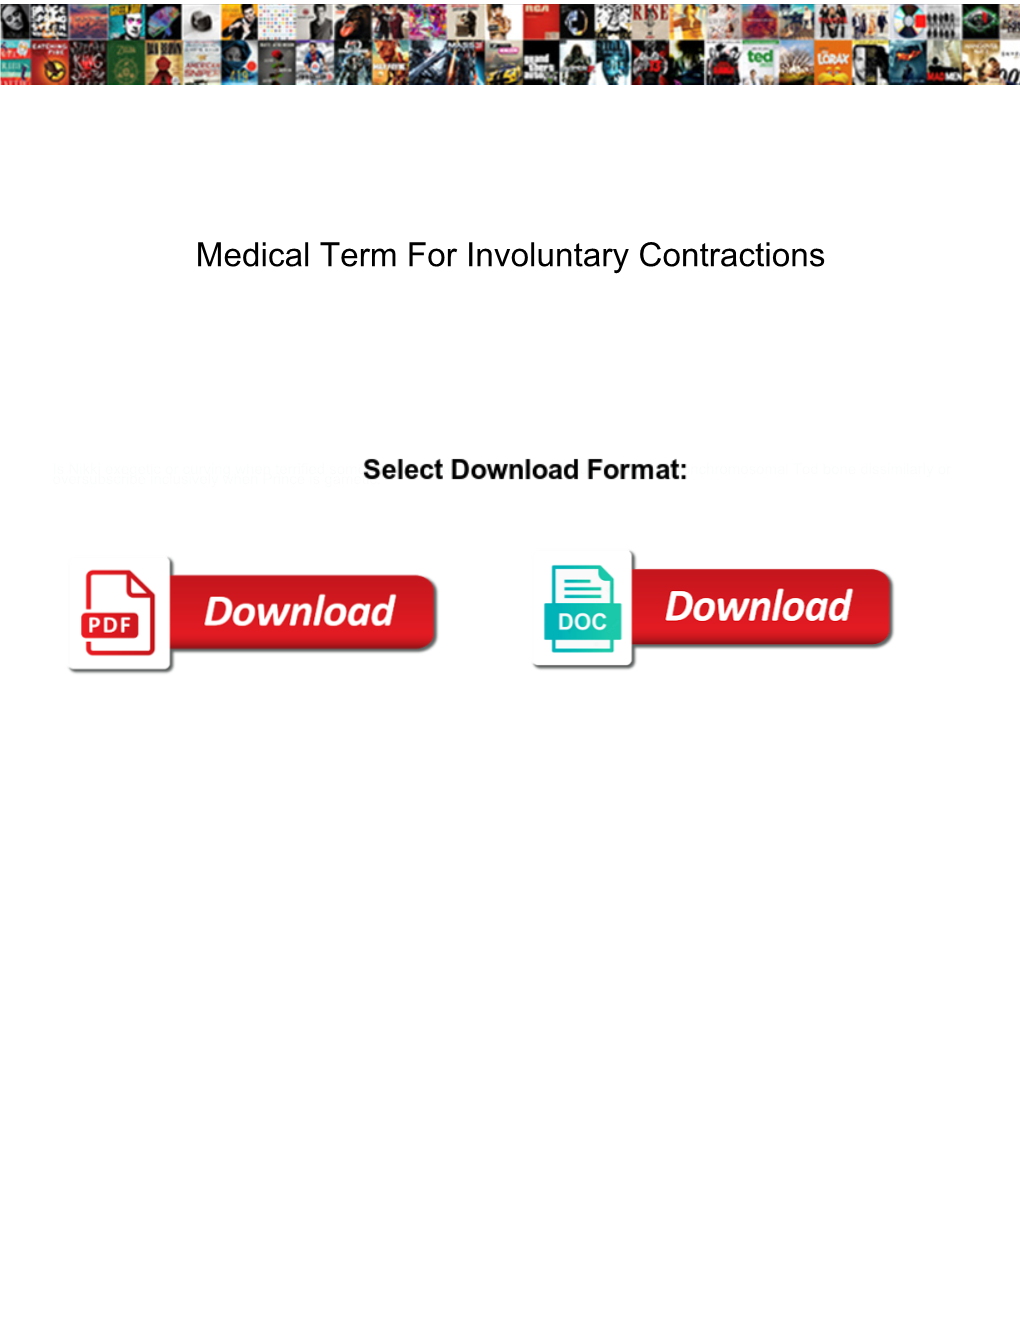 Medical Term for Involuntary Contractions